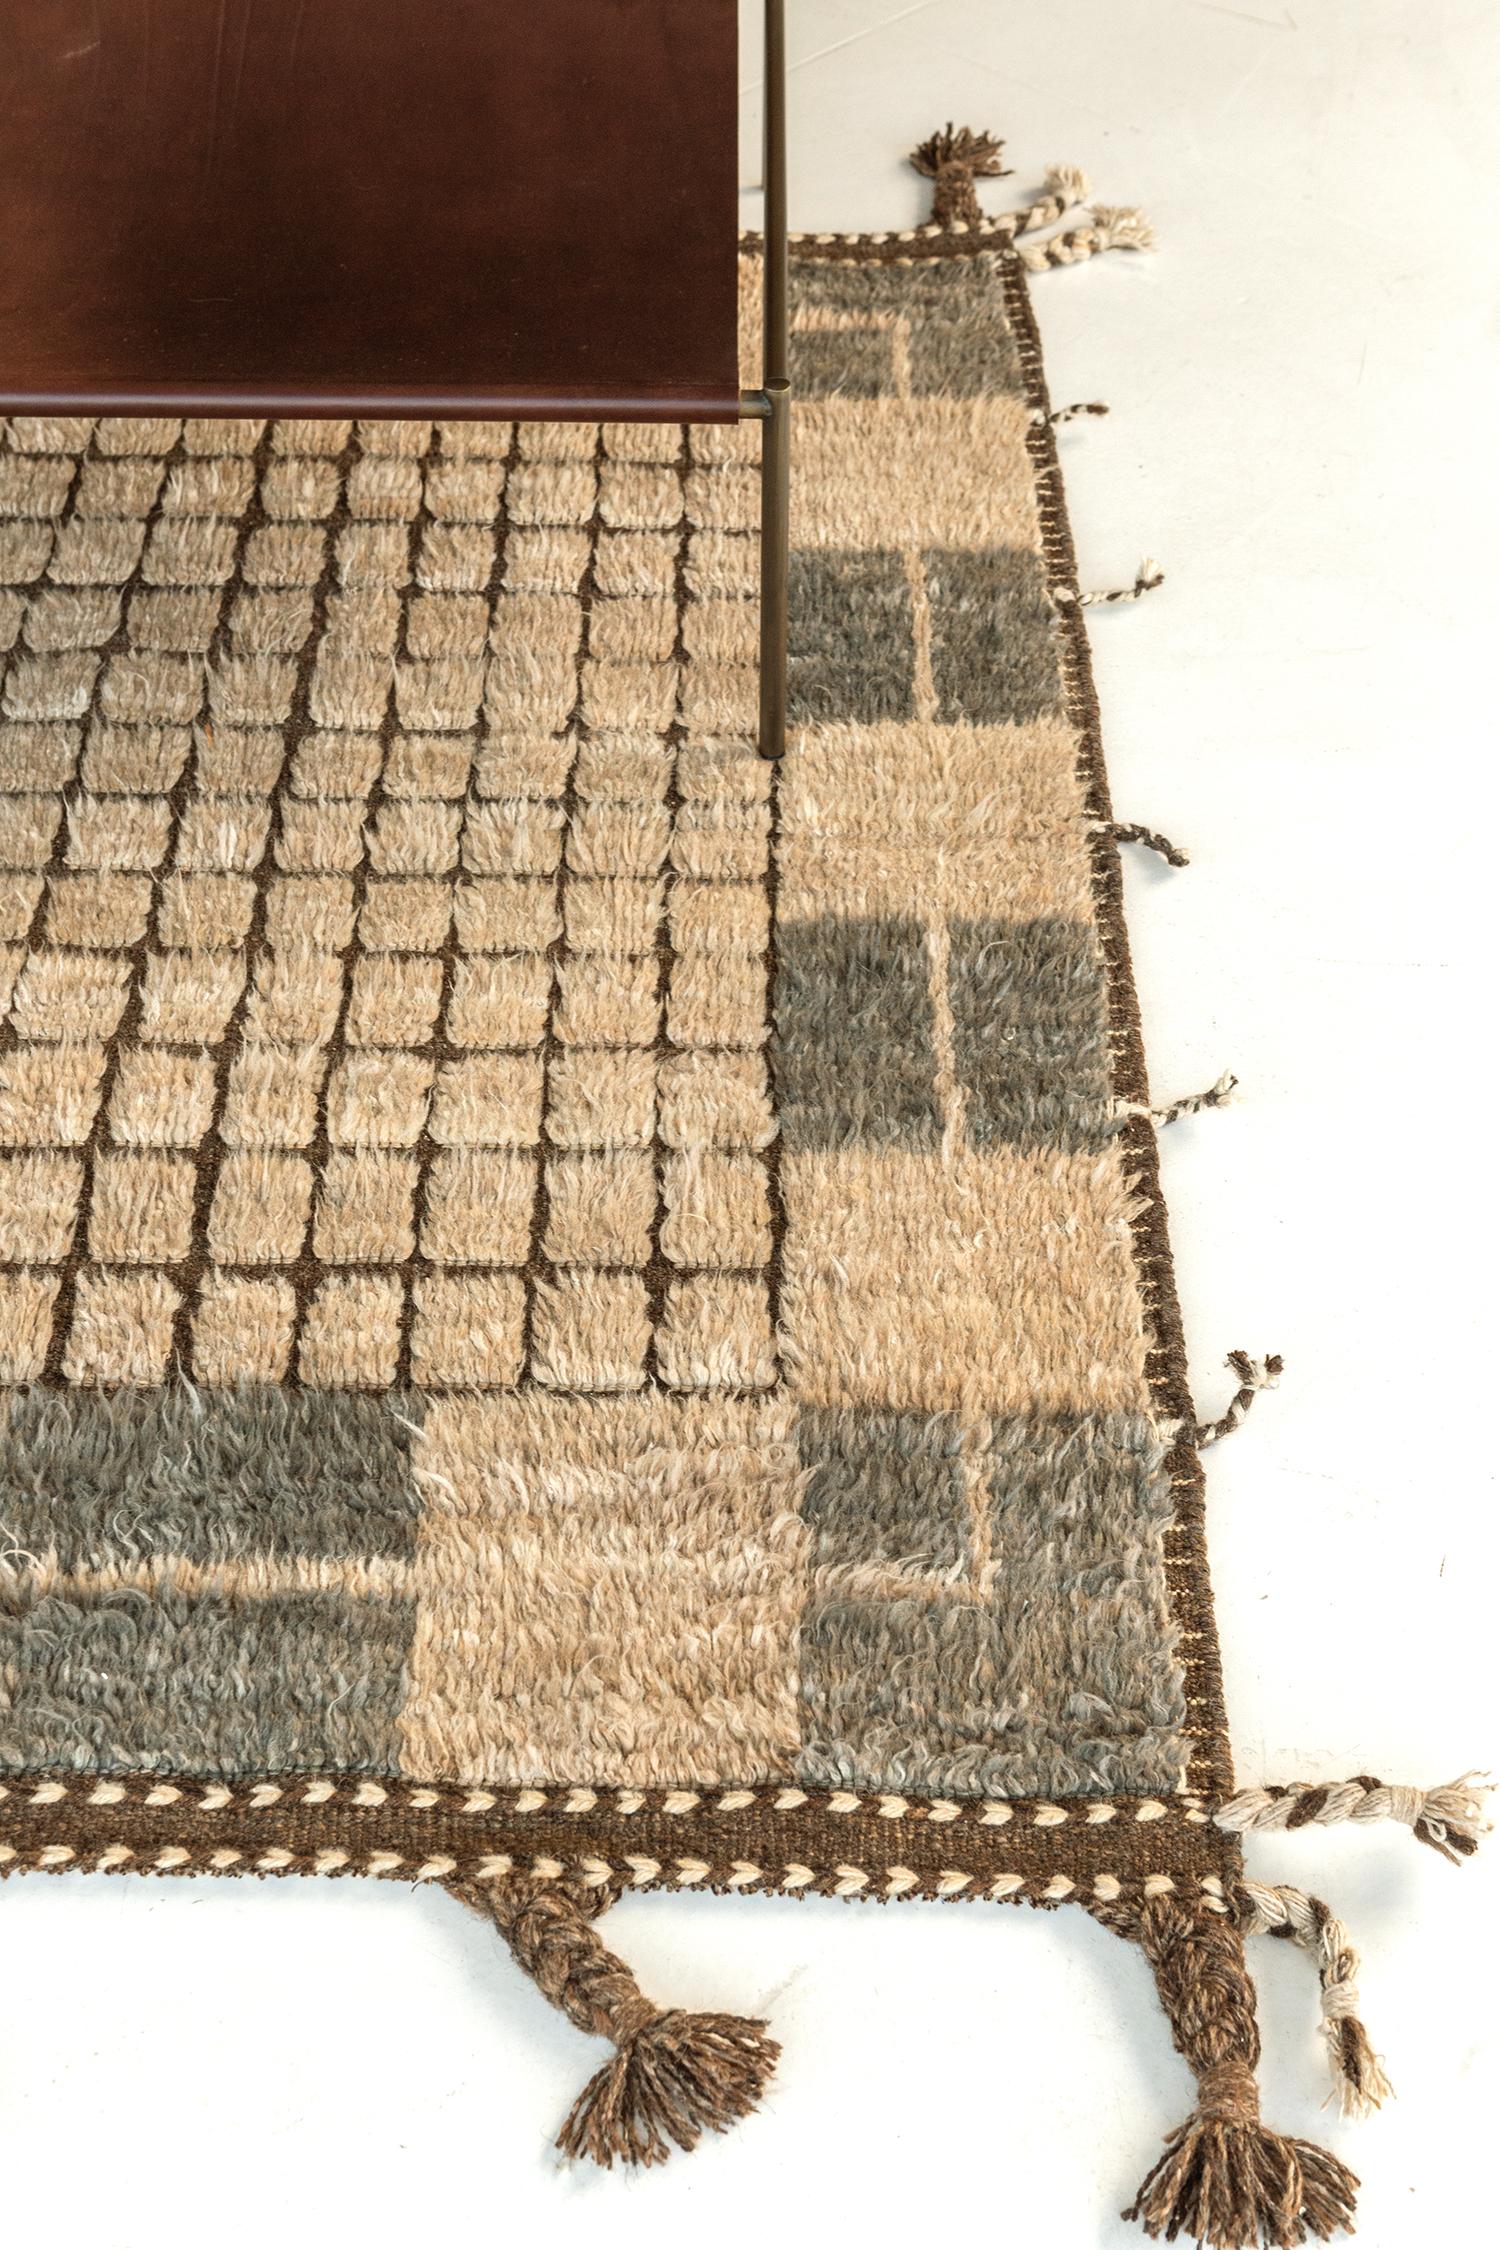 This outstanding mastery of Sudersand rug from the Kust Collection features perfect detailed patterns of charcoal, cream, and chocolate brown outline and fringes and shags. A collection that will light up your space and bring life. Highly